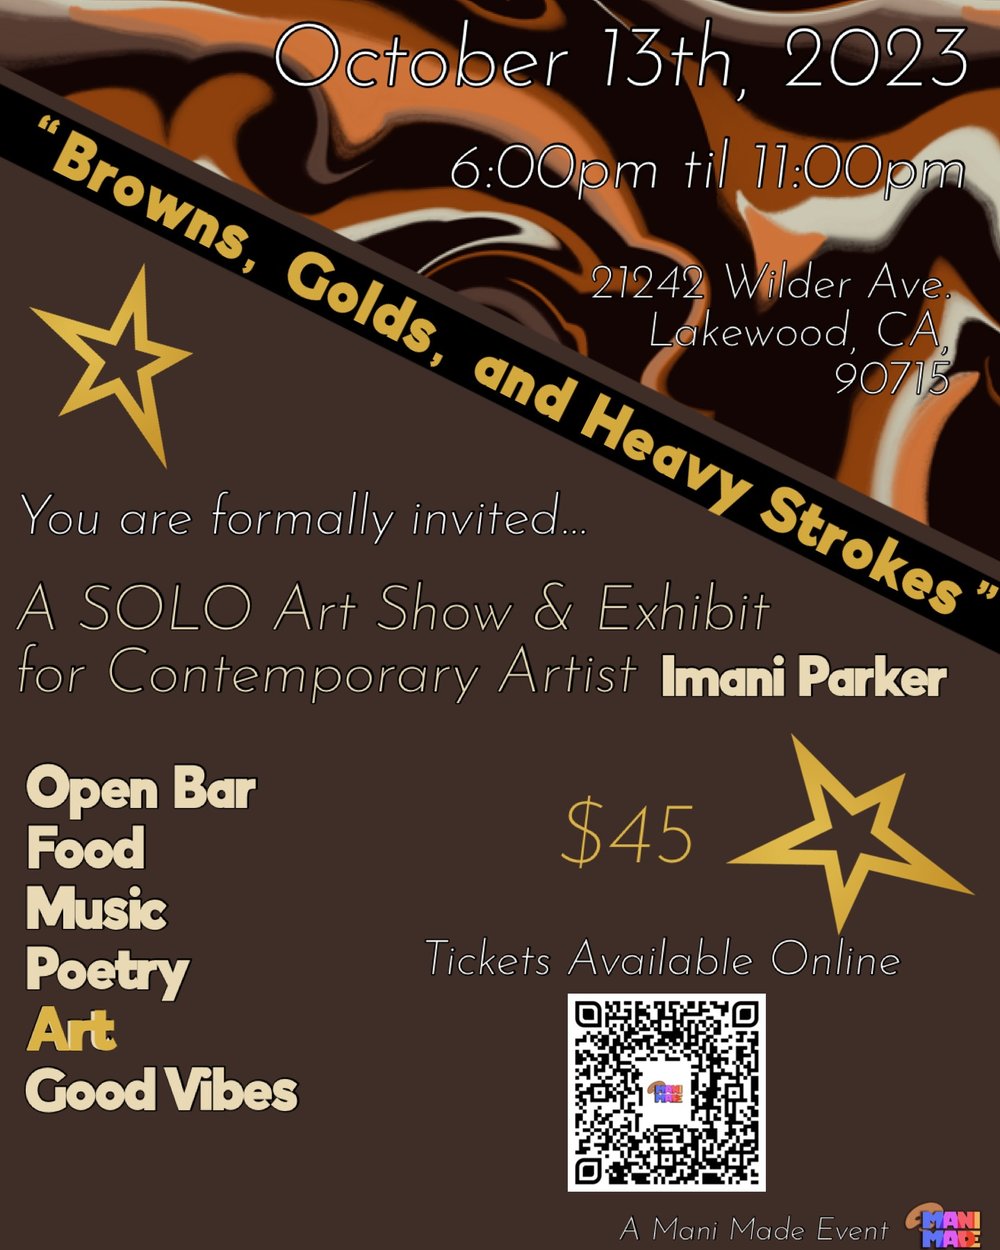 Image of “Browns, Golds, & Heavy Strokes” Solo Art Show